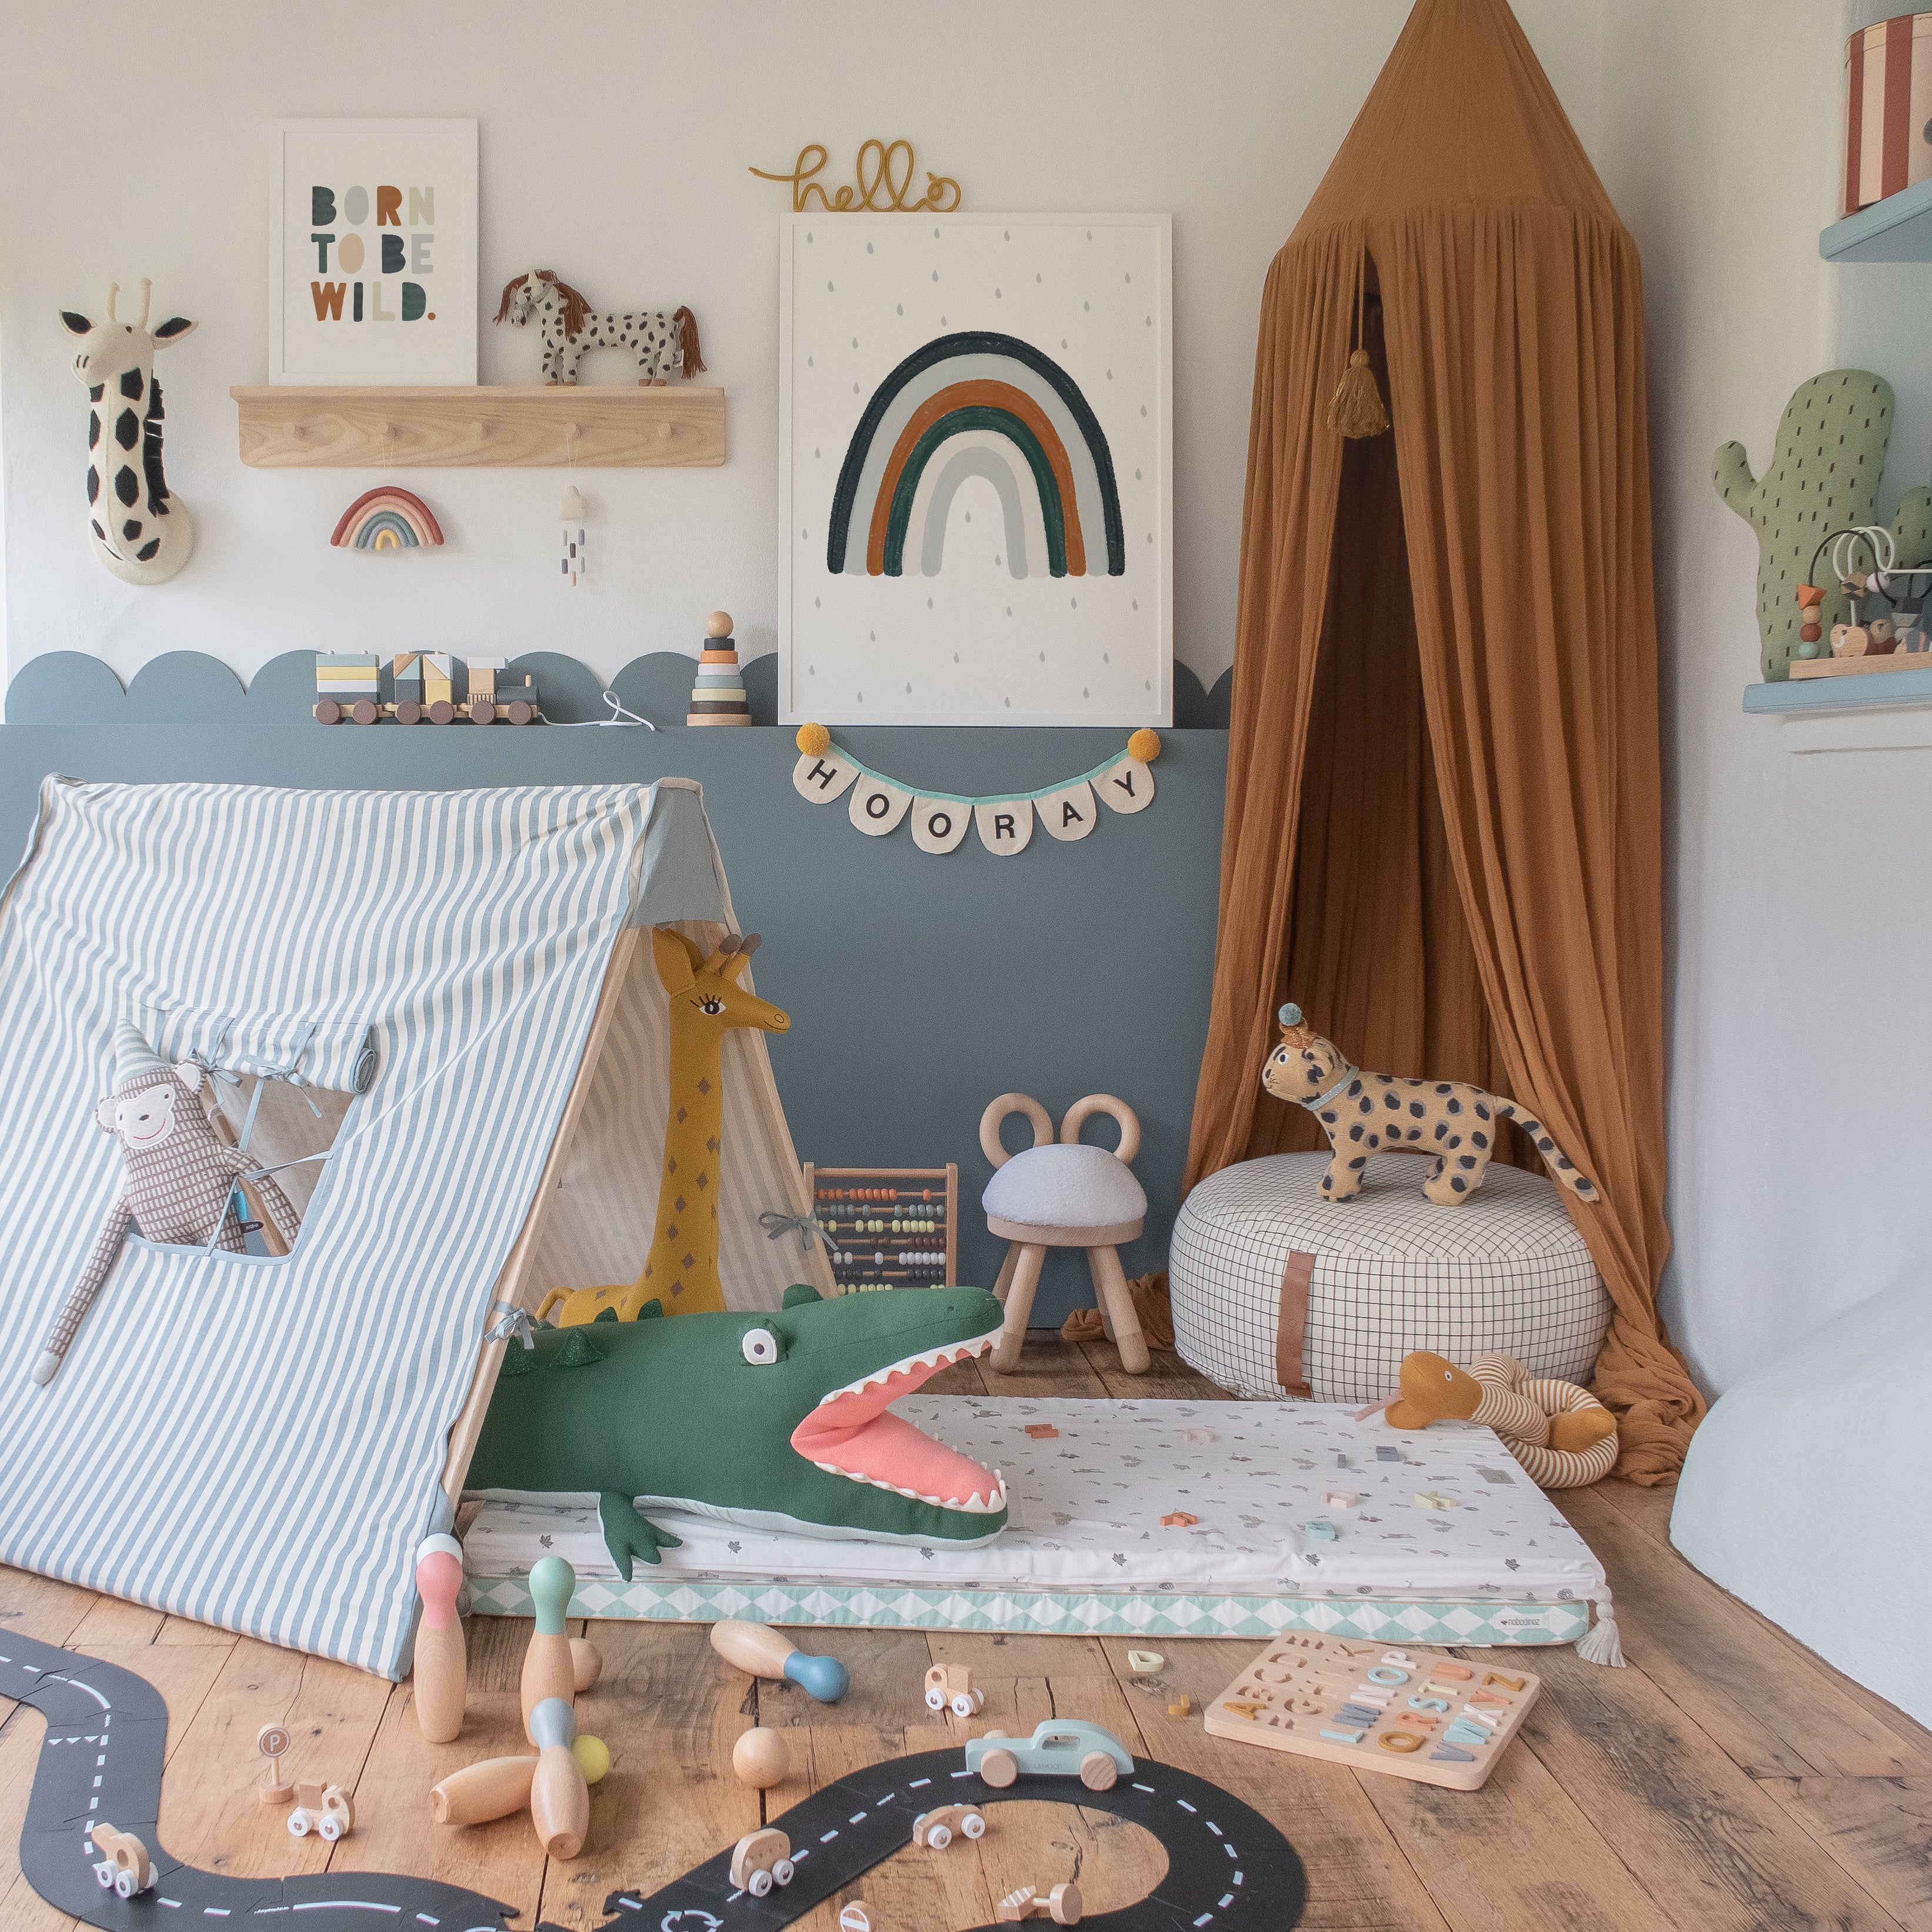 playroom-decor-ideas-how-to-decorate-a-playroom-interior-design-for-kids-play-tent